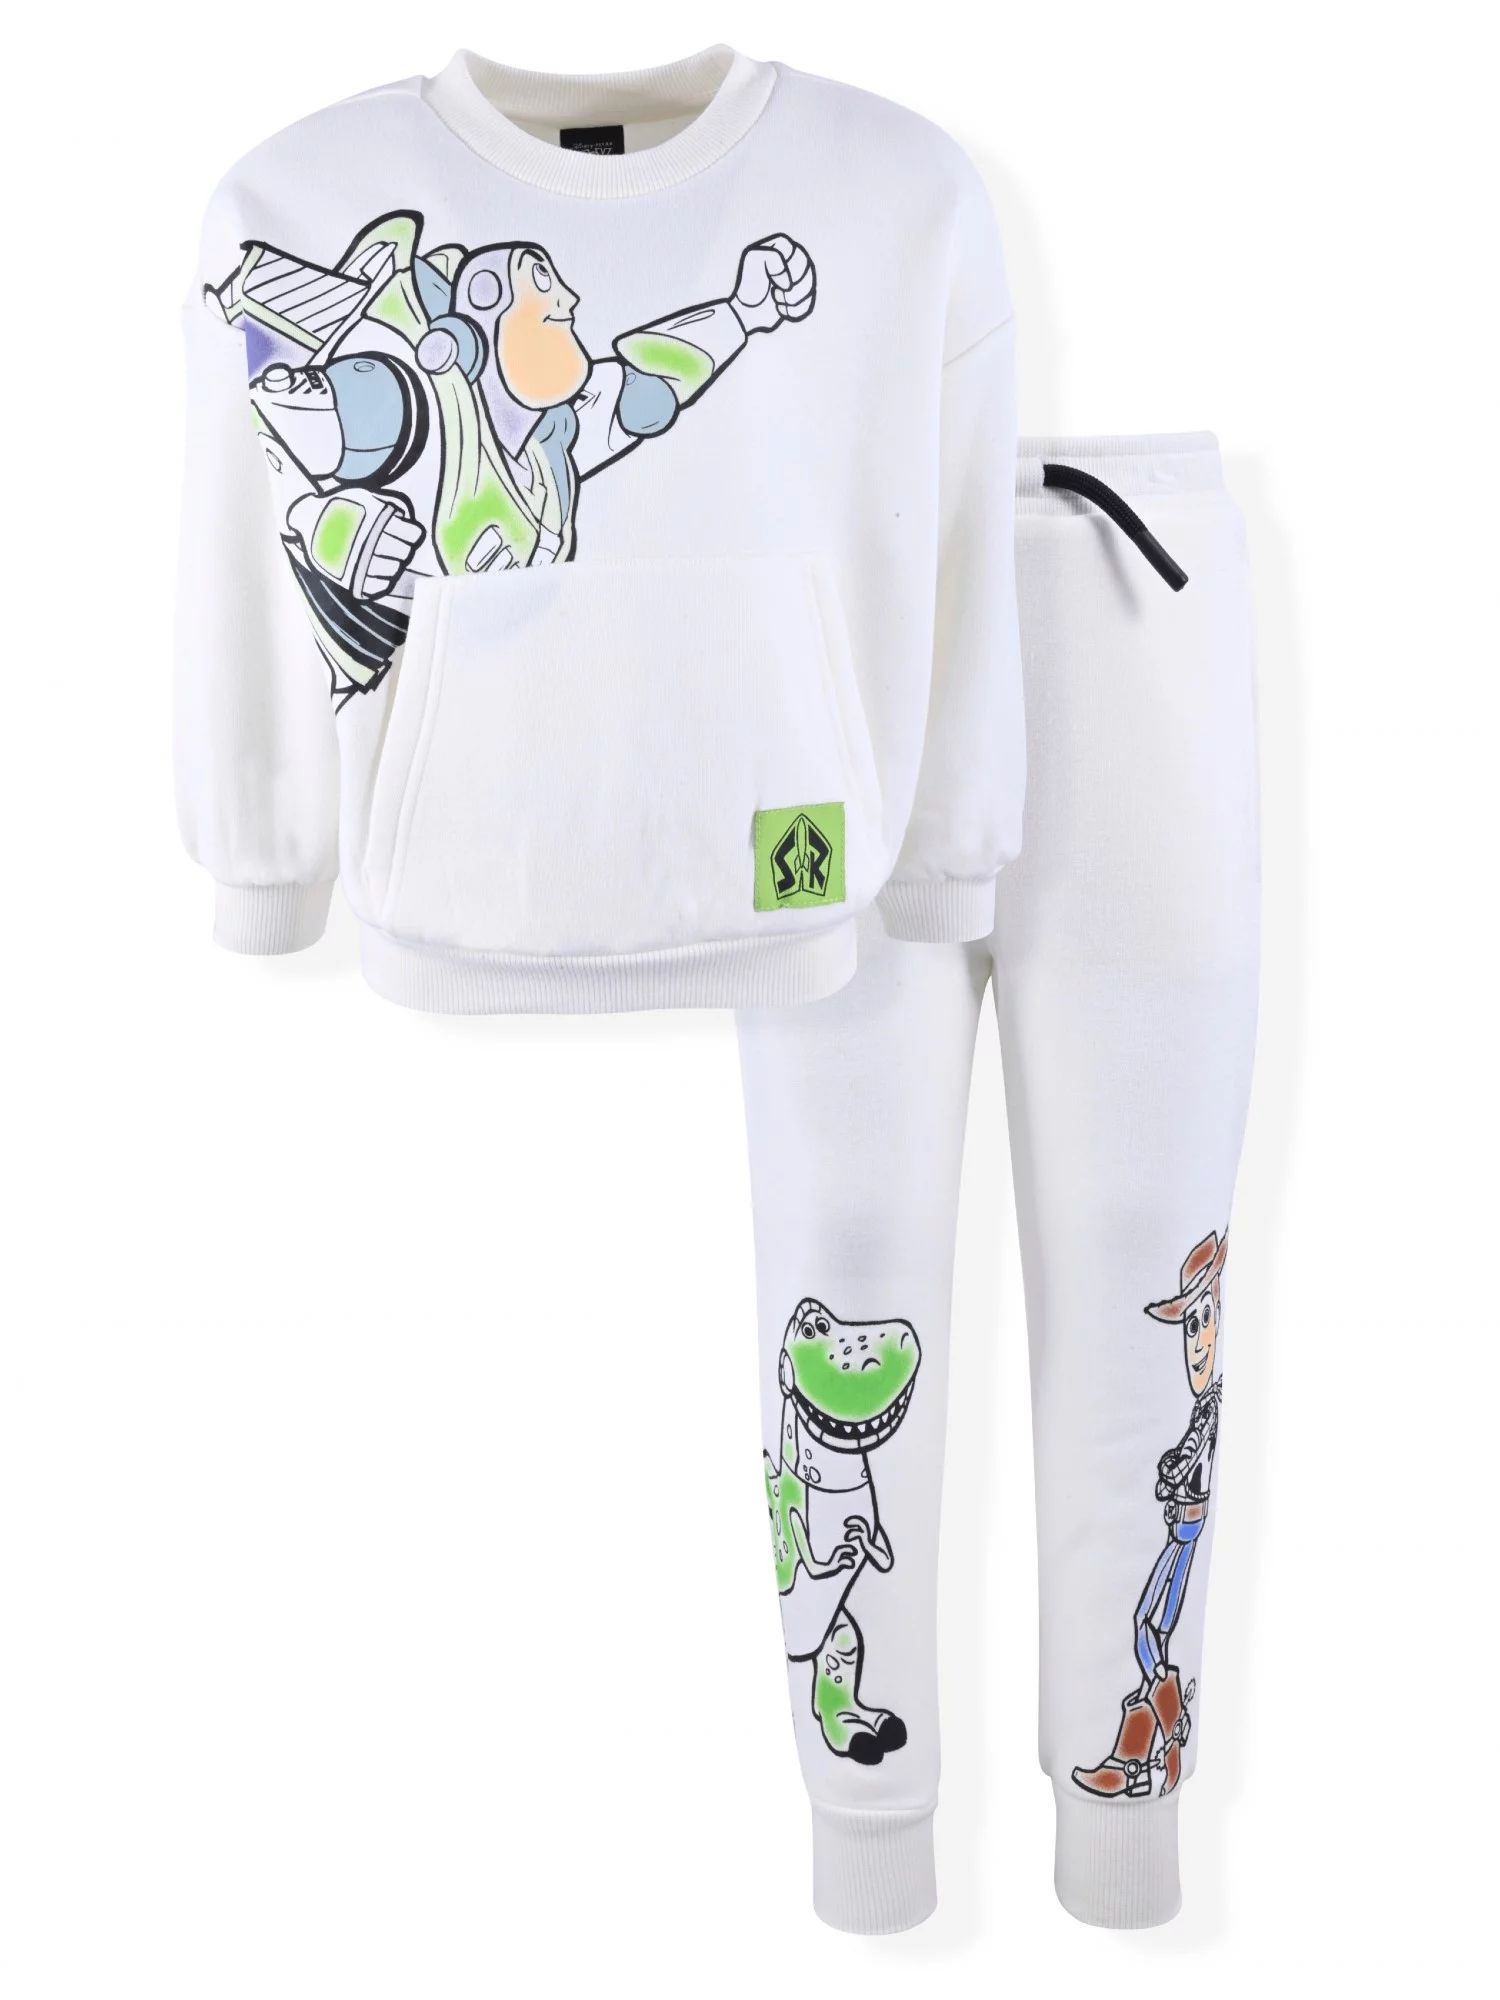 Buzz Lightyear Baby and Toddler Boy Fleece Sweatshirt and Jogger Outfit Set, 2-Piece, Sizes 12M-5... | Walmart (US)